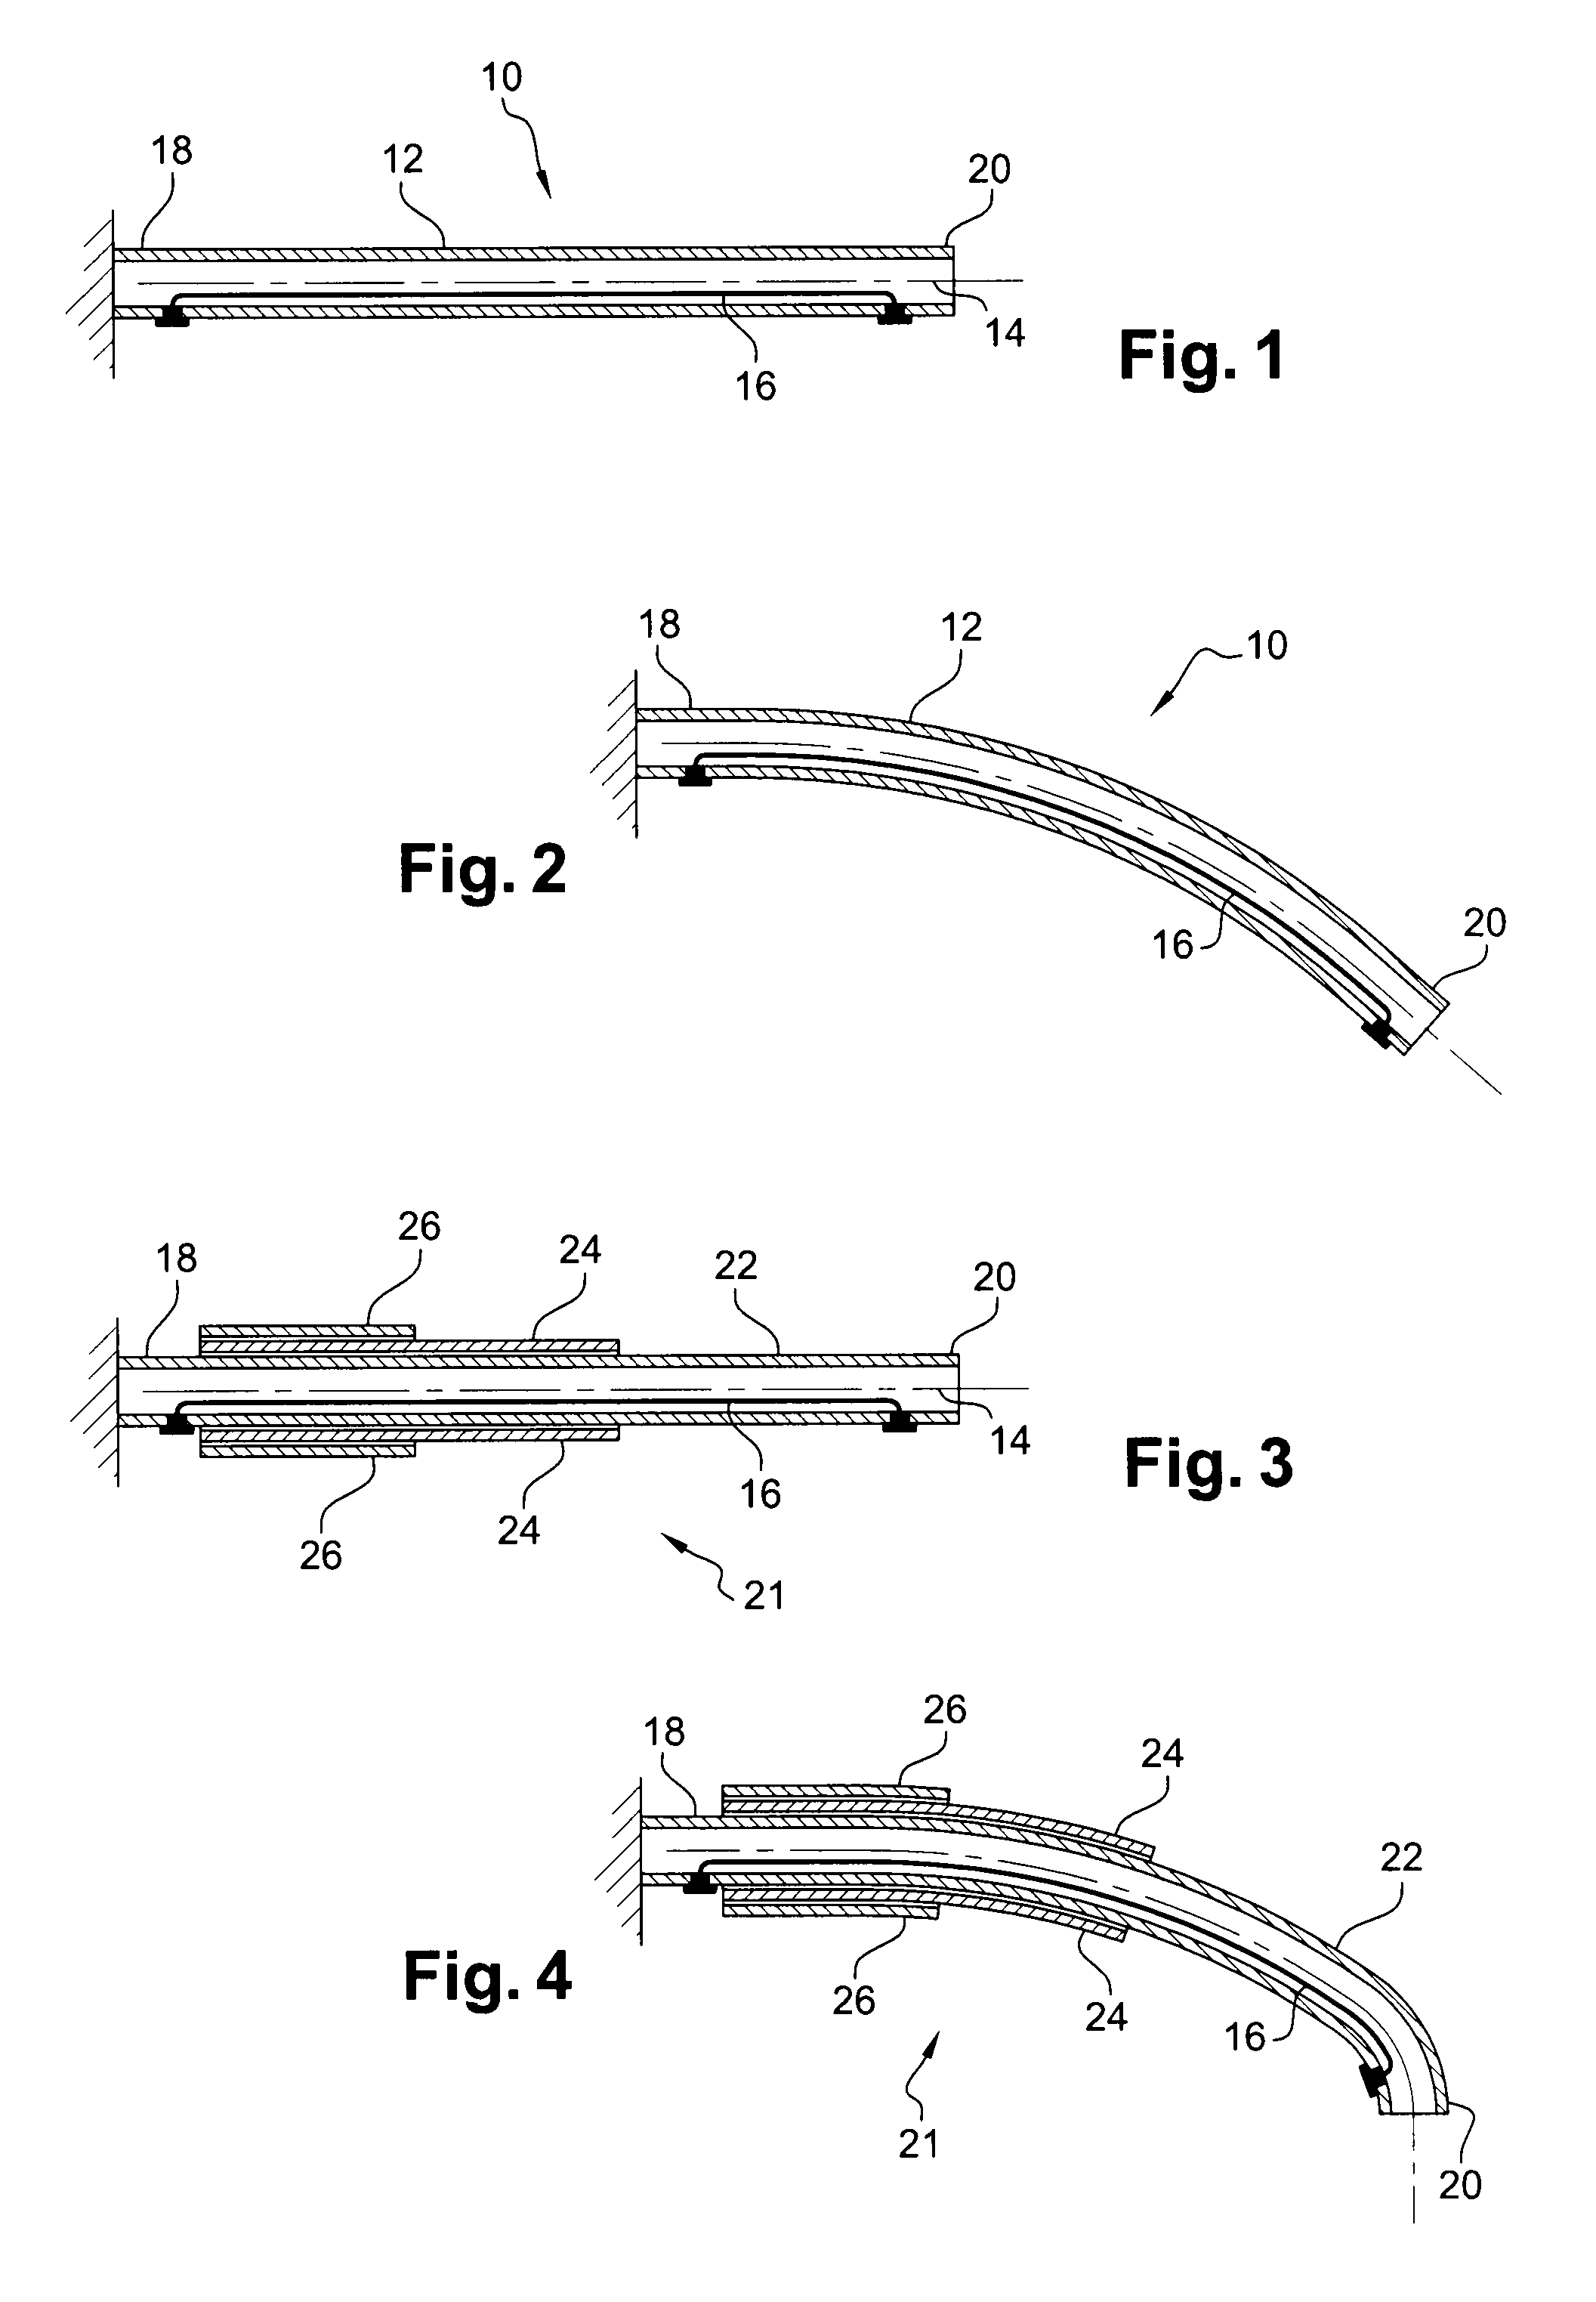 Steerable structure of catheter or endoscope type